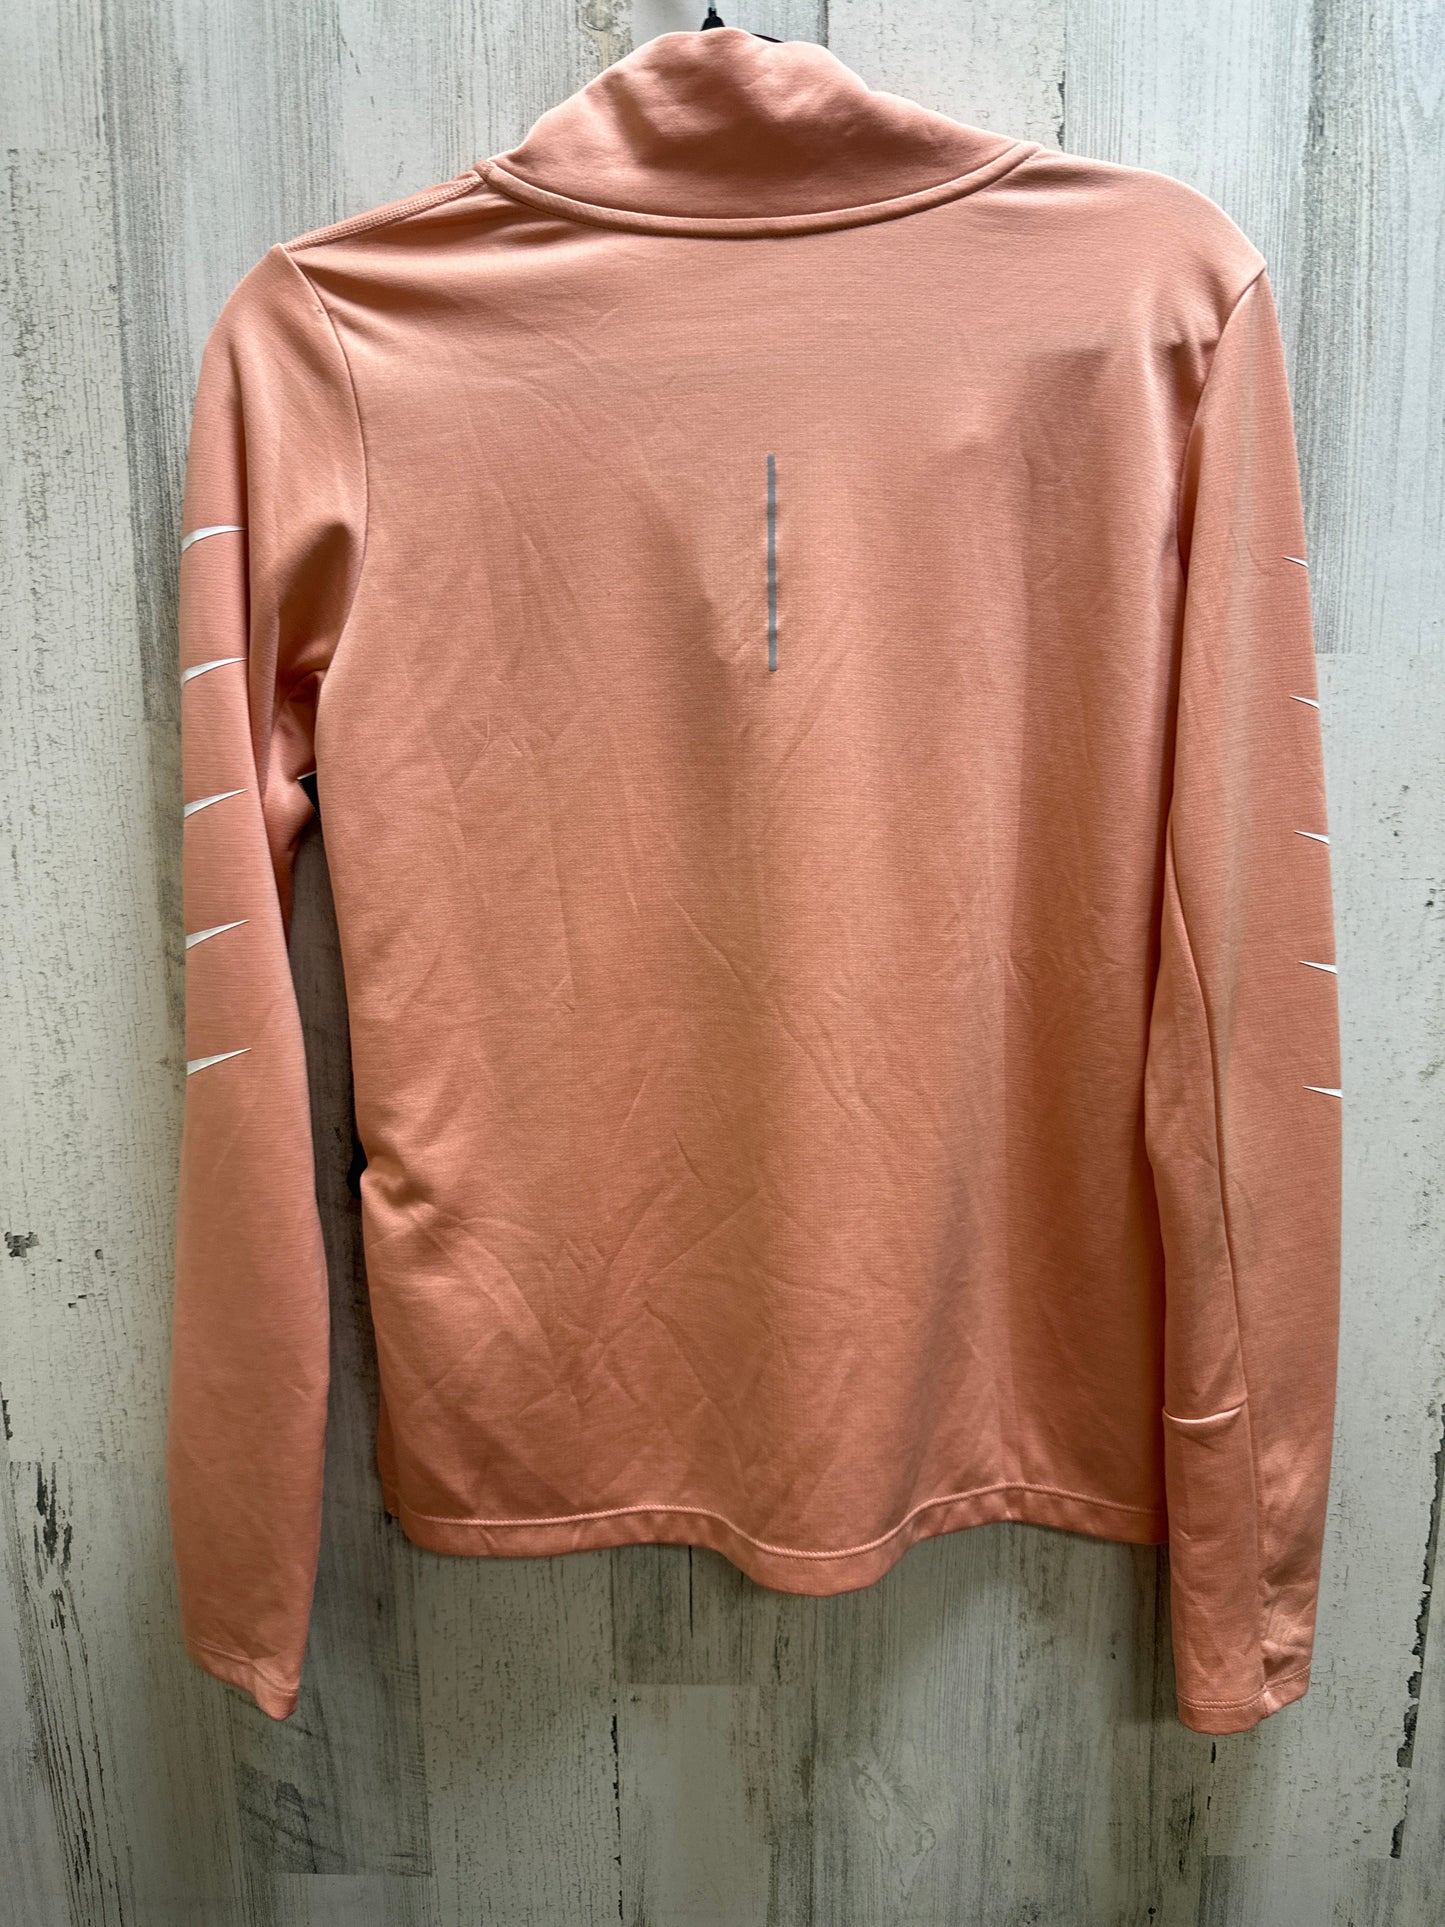 Pink Athletic Top Long Sleeve Collar Nike, Size S